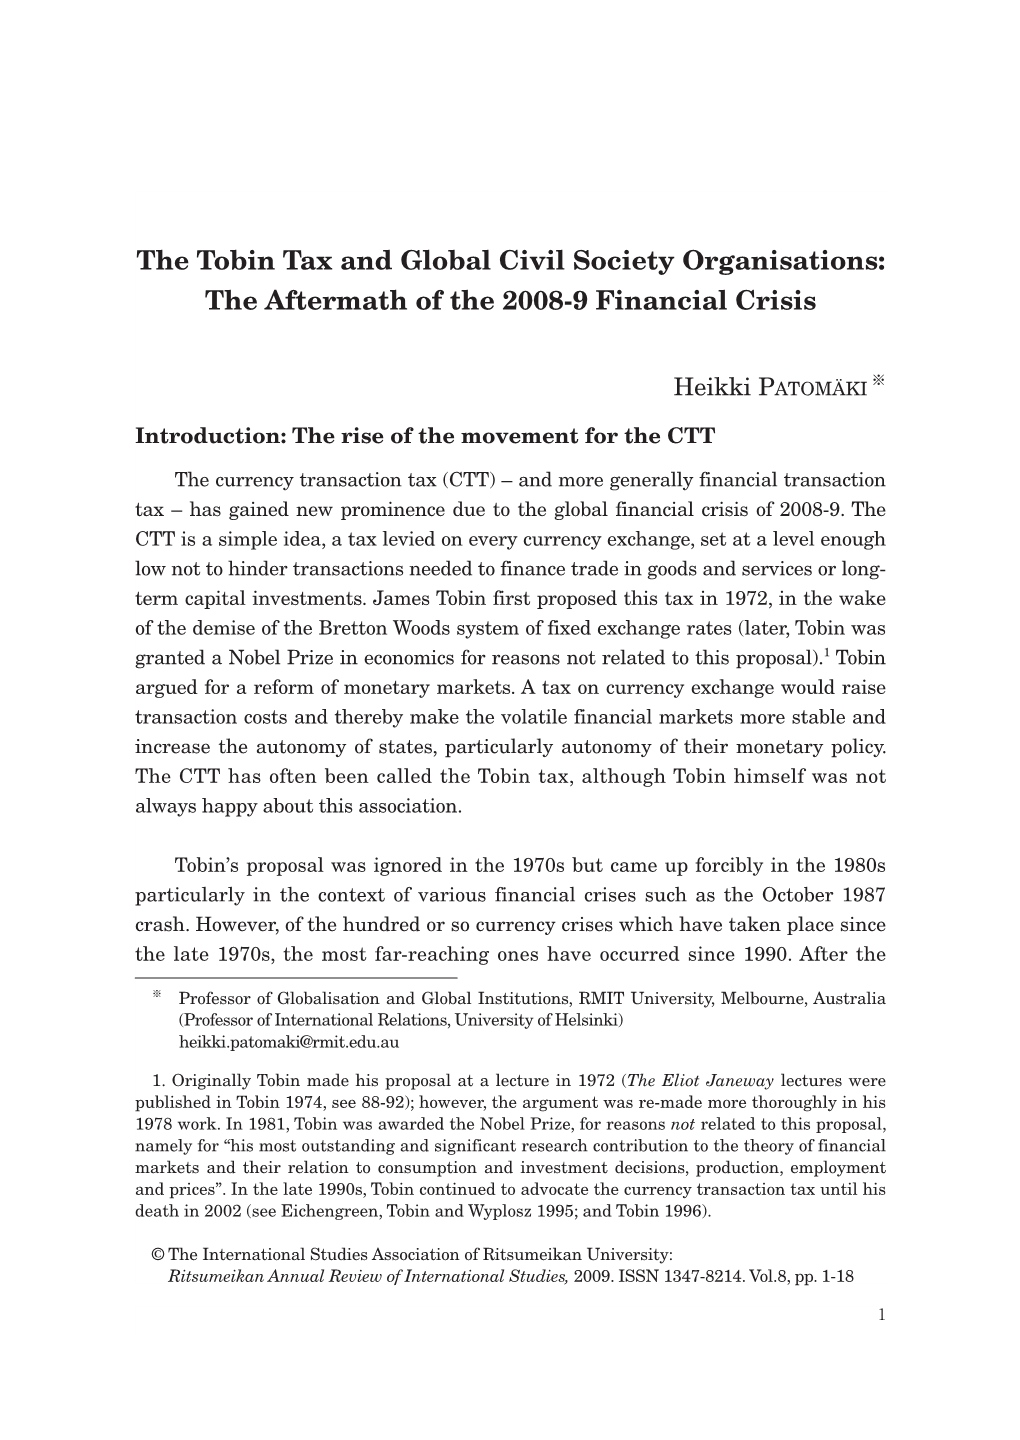 The Tobin Tax and Global Civil Society Organisations: the Aftermath of the 2008-9 Financial Crisis